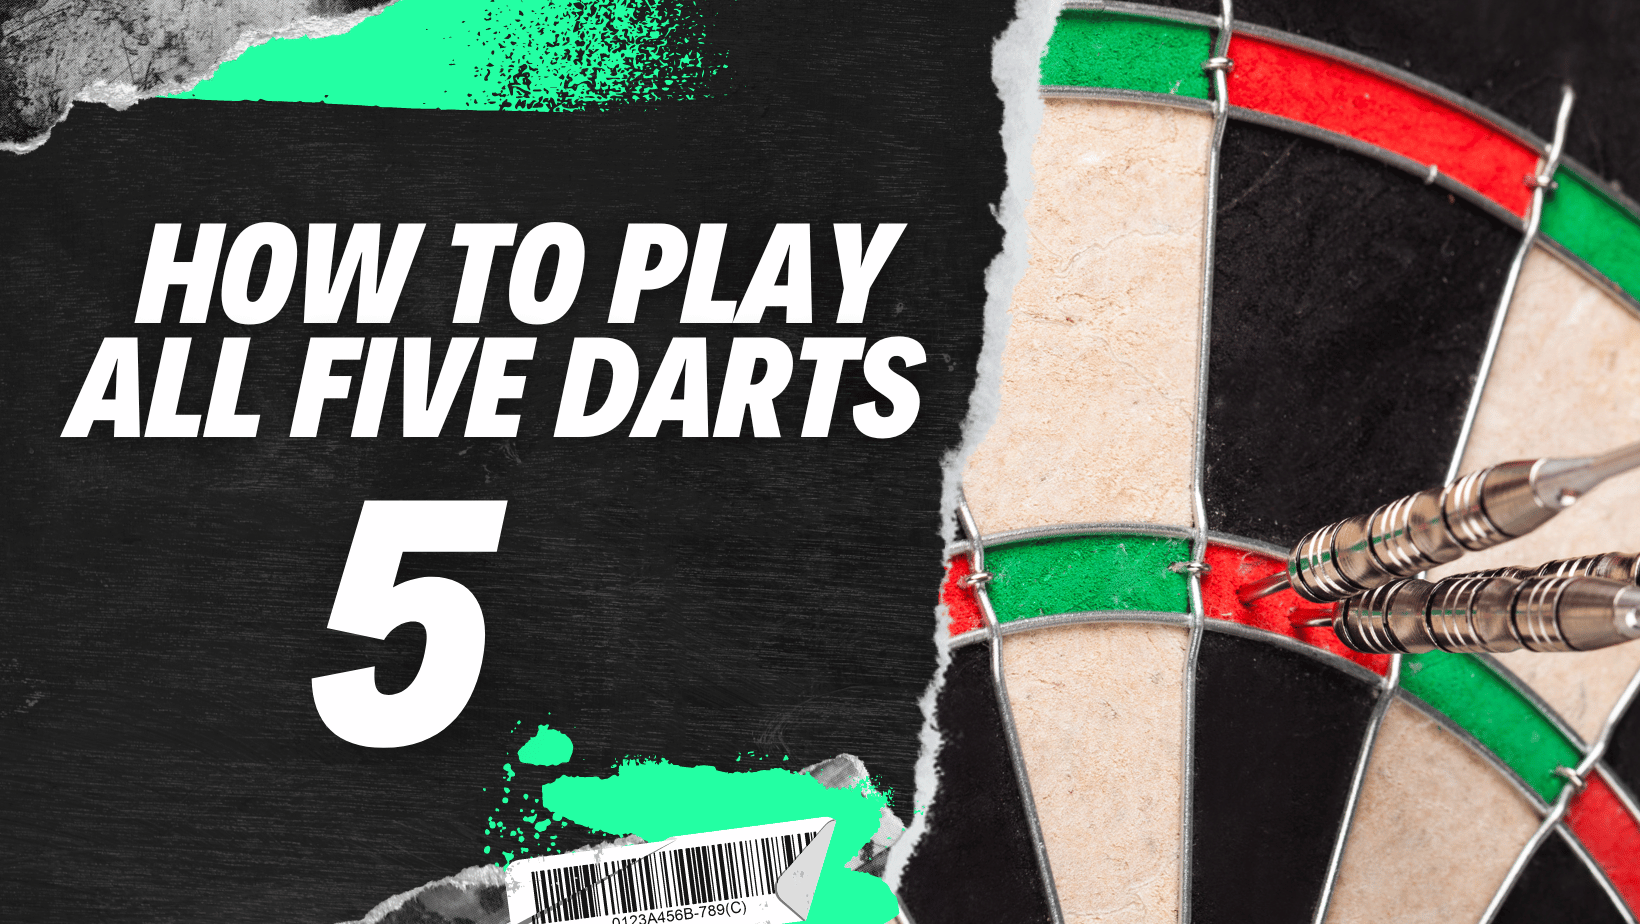 All Five or 51 by 5s Darts 1